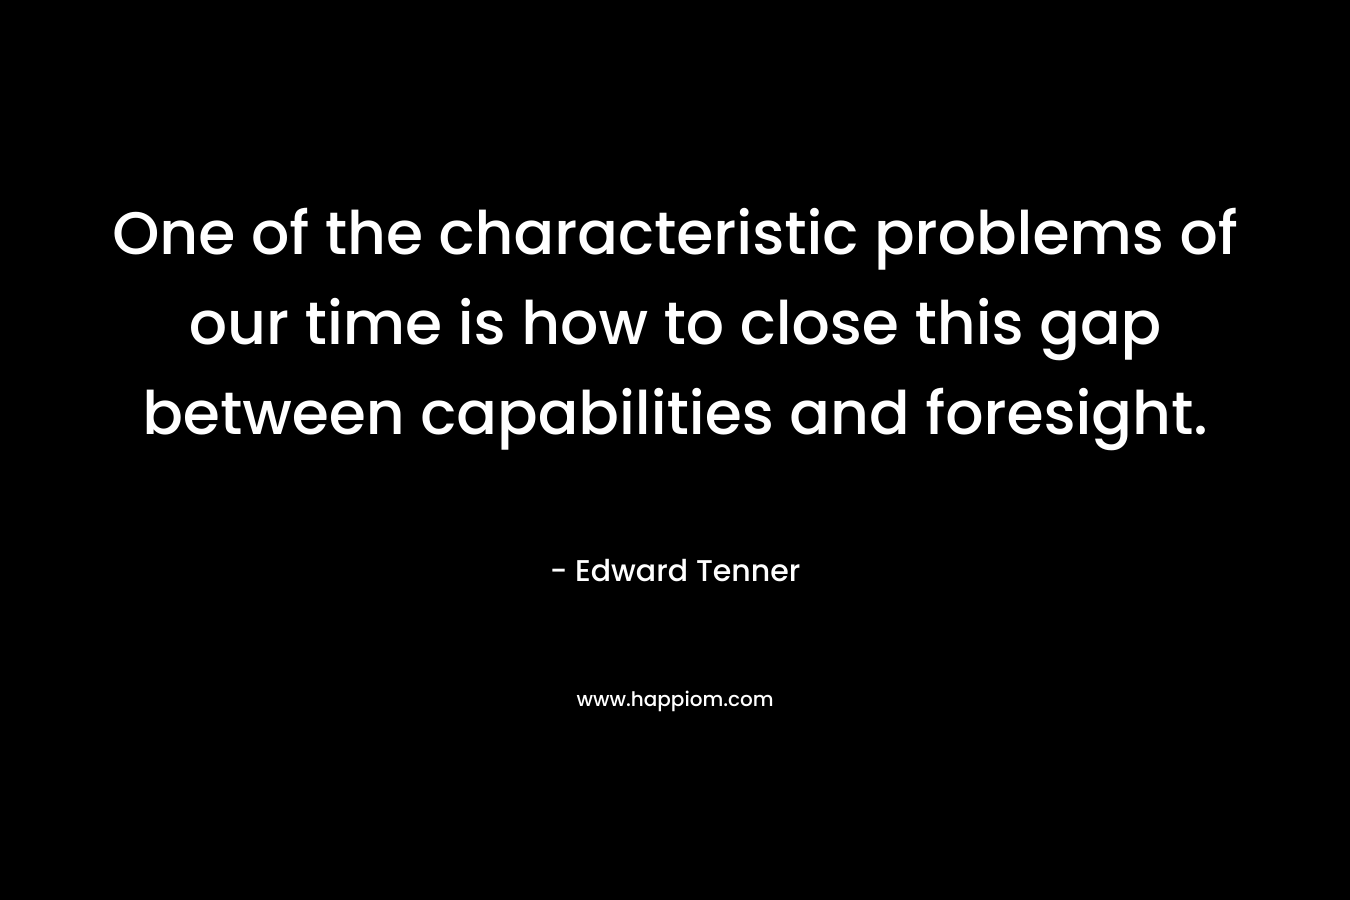 One of the characteristic problems of our time is how to close this gap between capabilities and foresight. – Edward Tenner